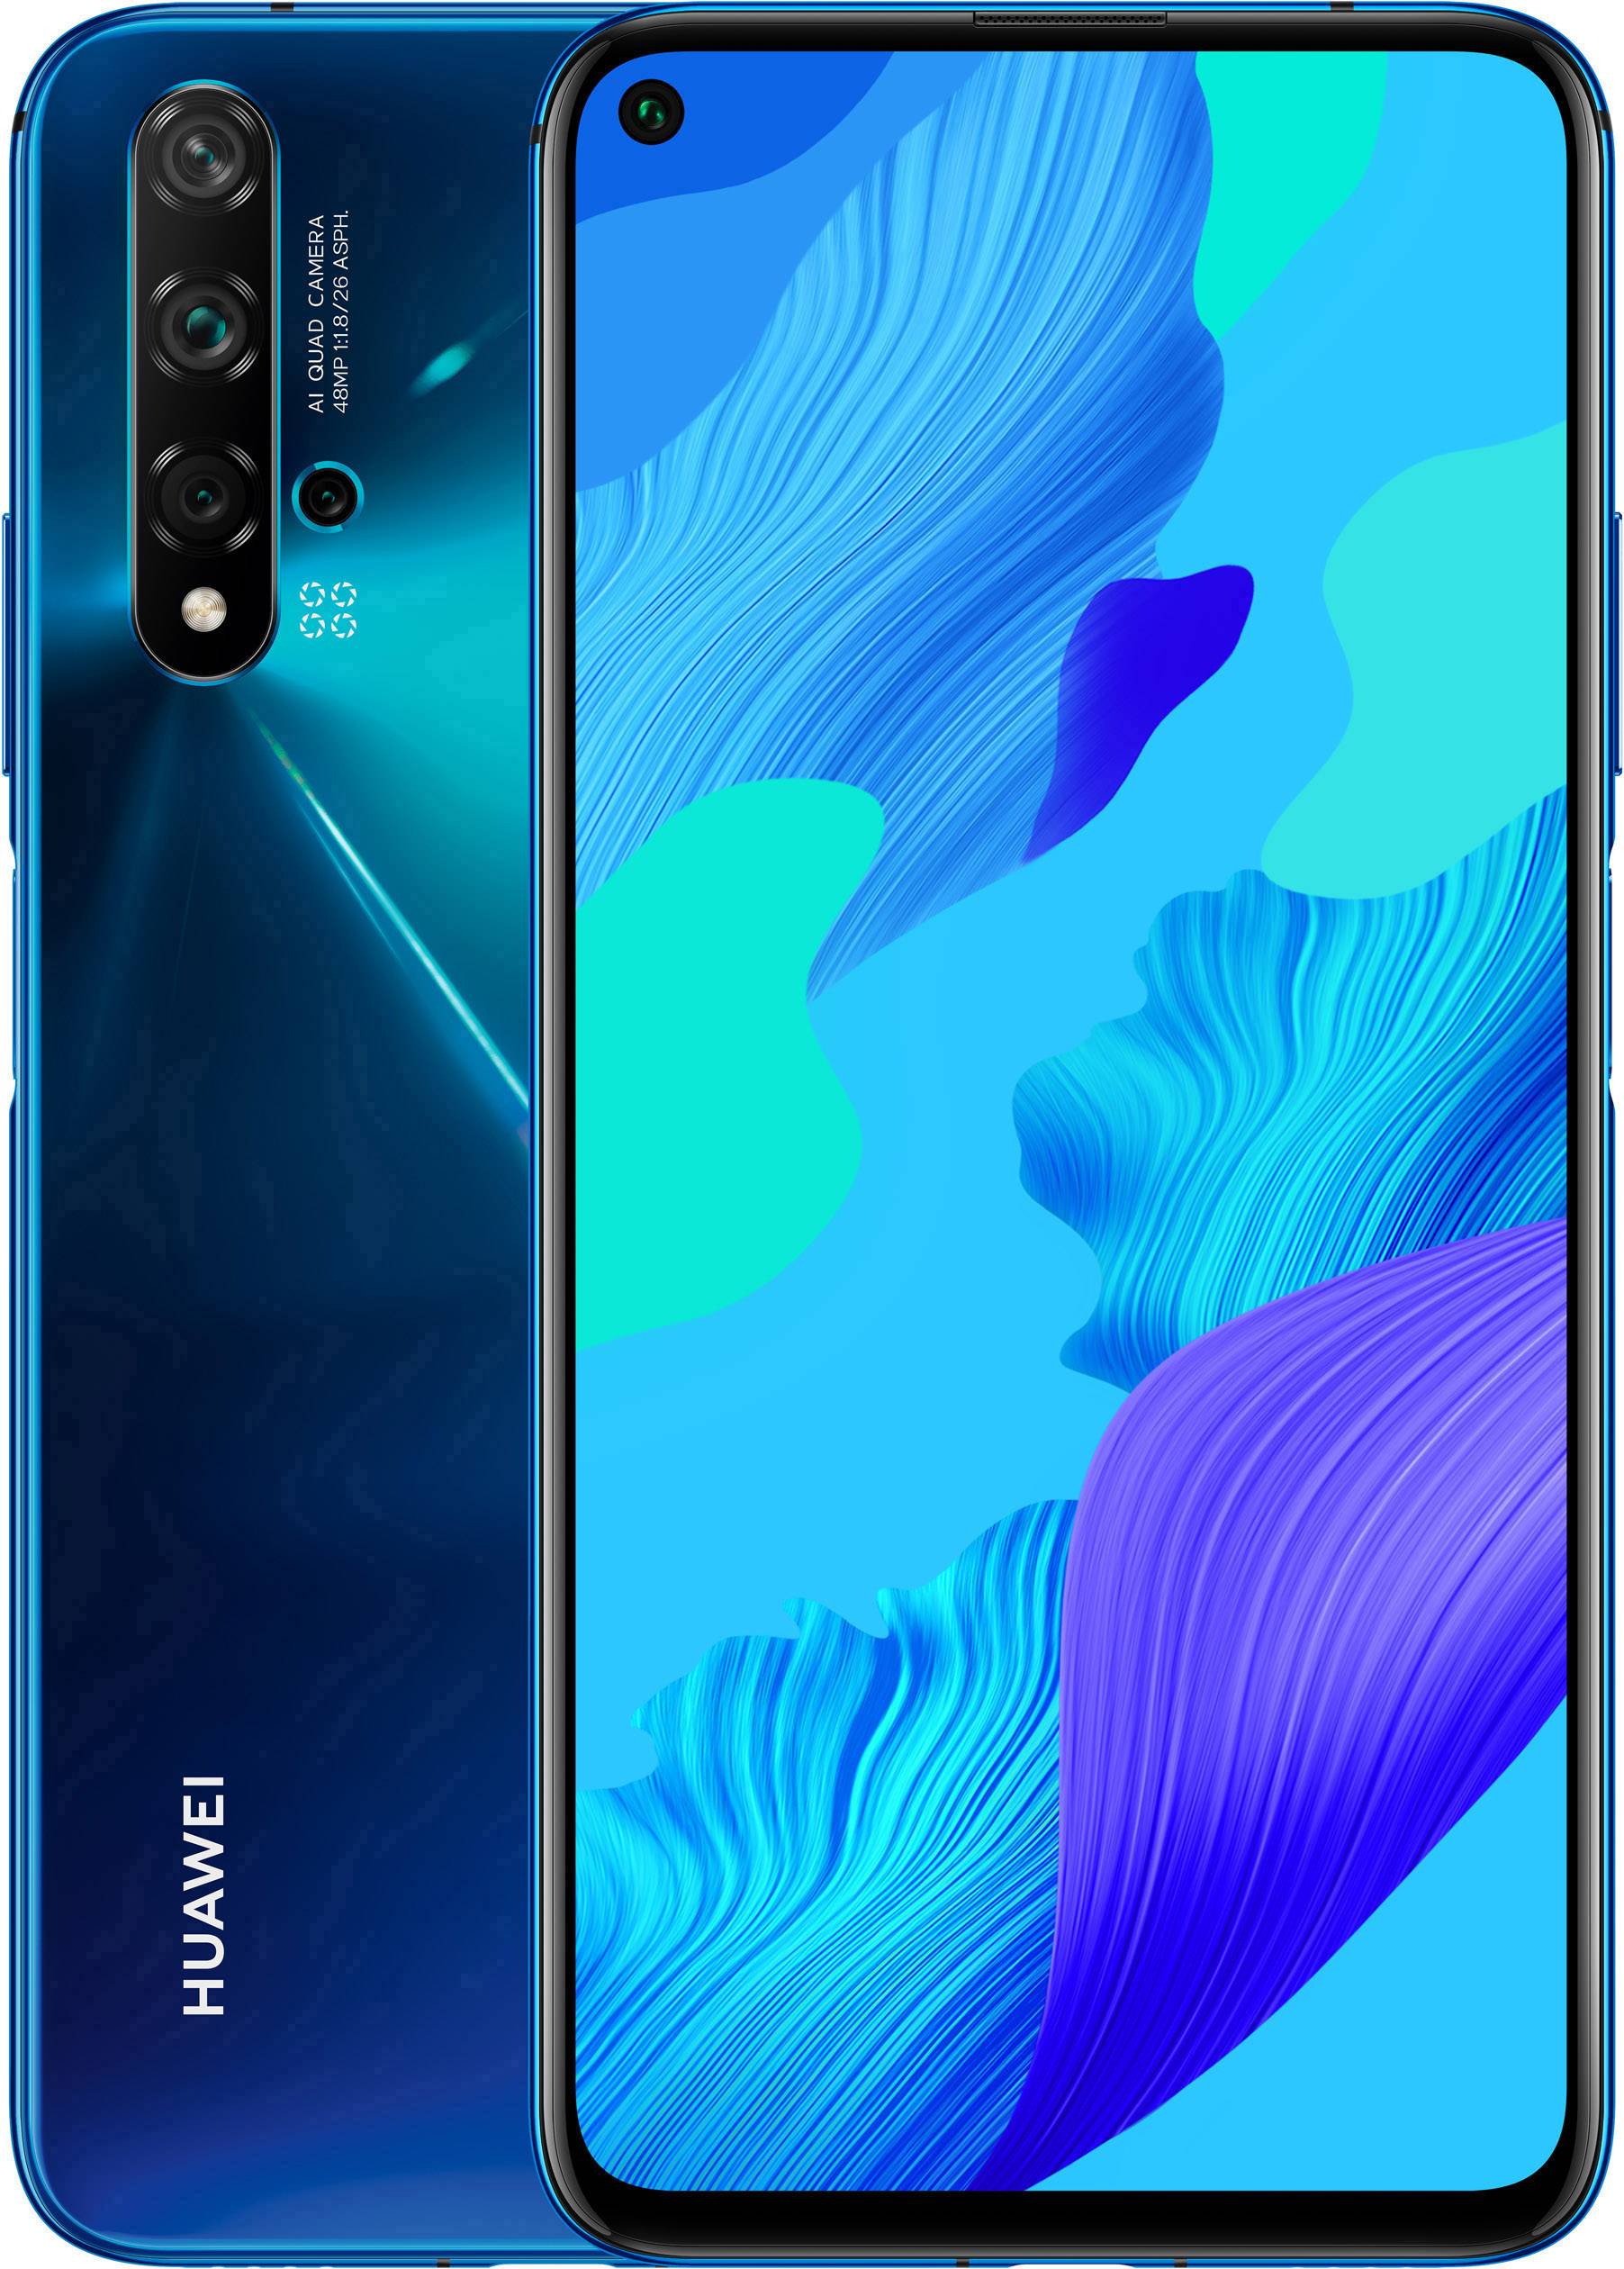 Huawei Nova 5t 128gb Dual Sim Blue Special Import Connected Devices